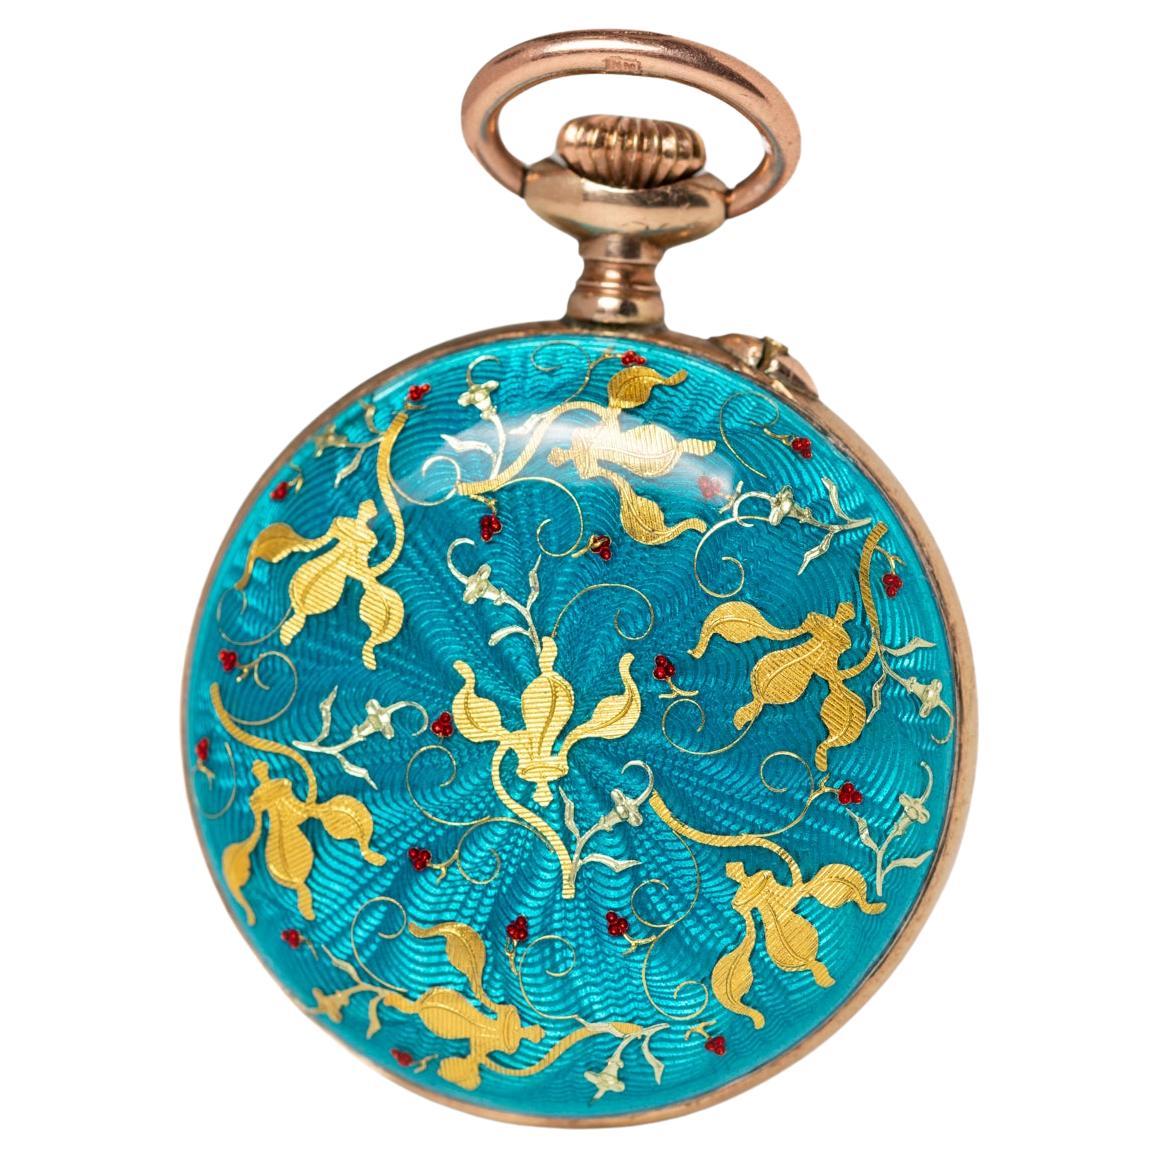 Antique Swiss Silver and Turquoise Guilloche Enamel Fauvette HAD Pocket Watch 